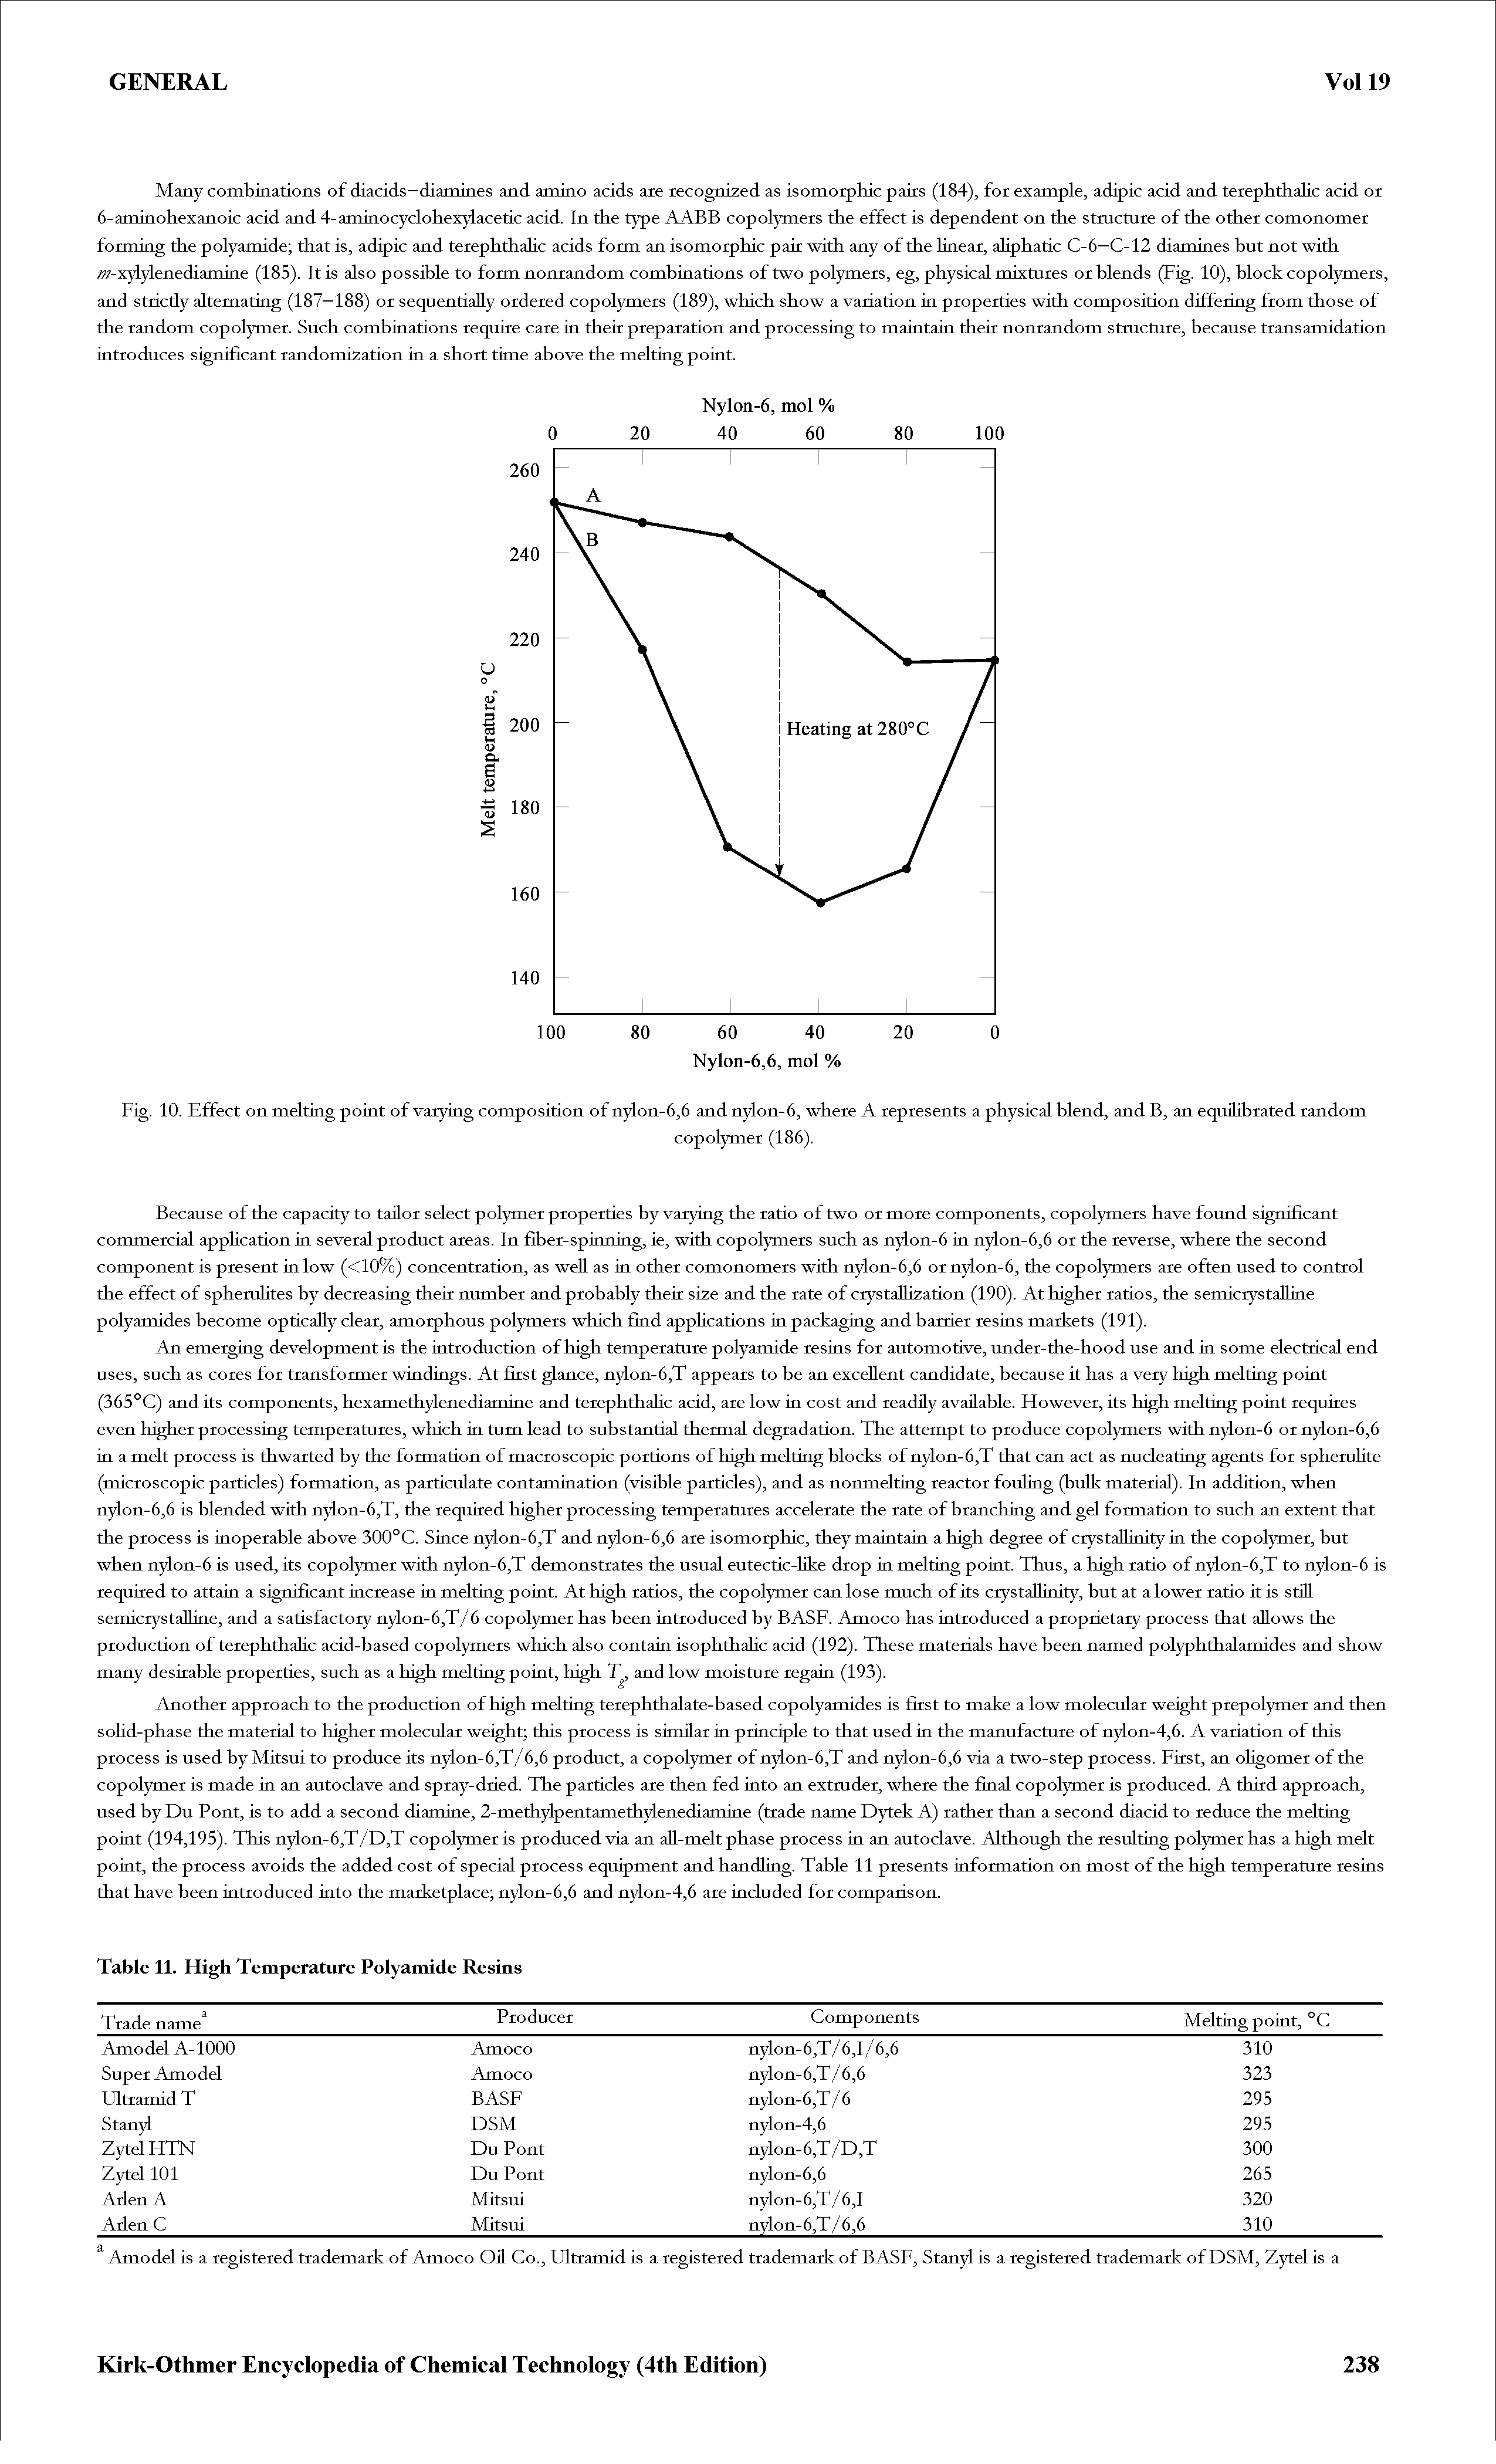 Fig. 10. Effect on melting point of varying composition of nylon-6,6 and nylon-6, where A represents a physical blend, and B, an equiUbrated random...